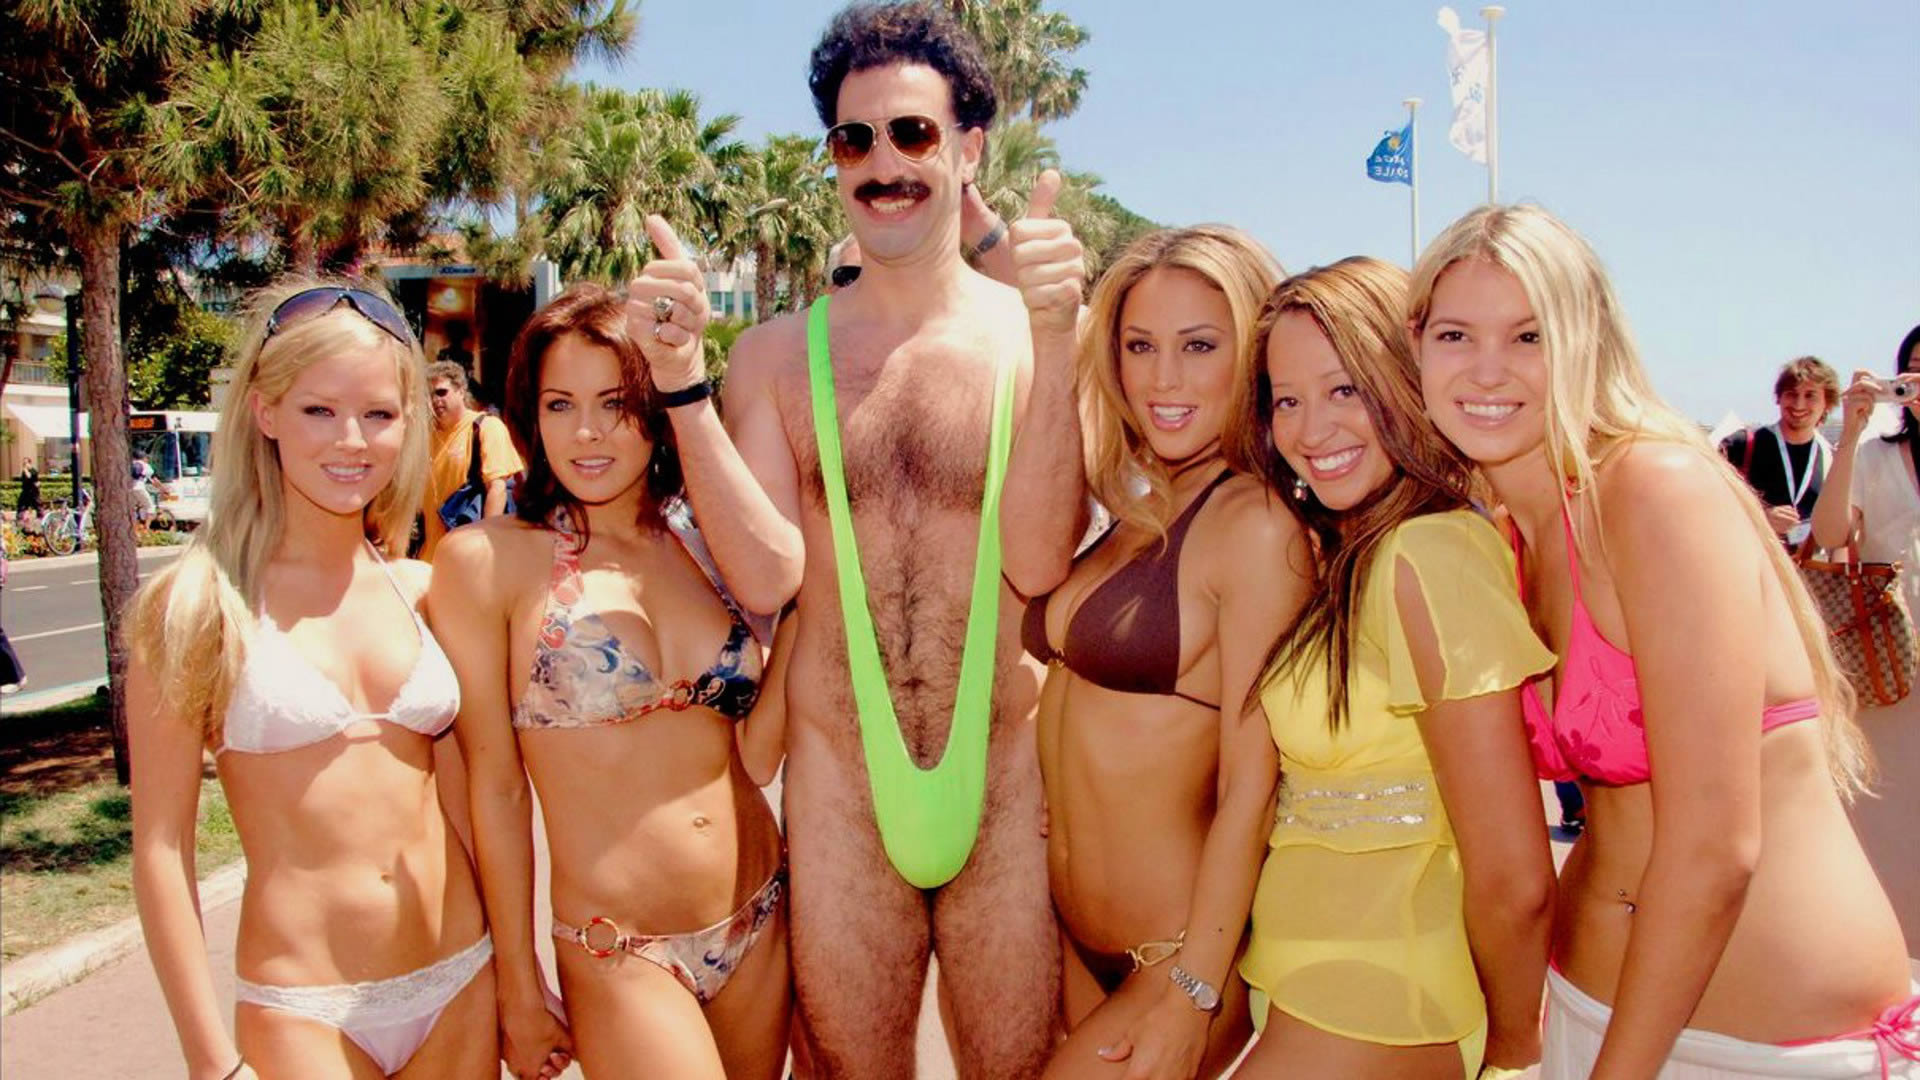 borat in bathing suit with sexy girls, from borat the movie